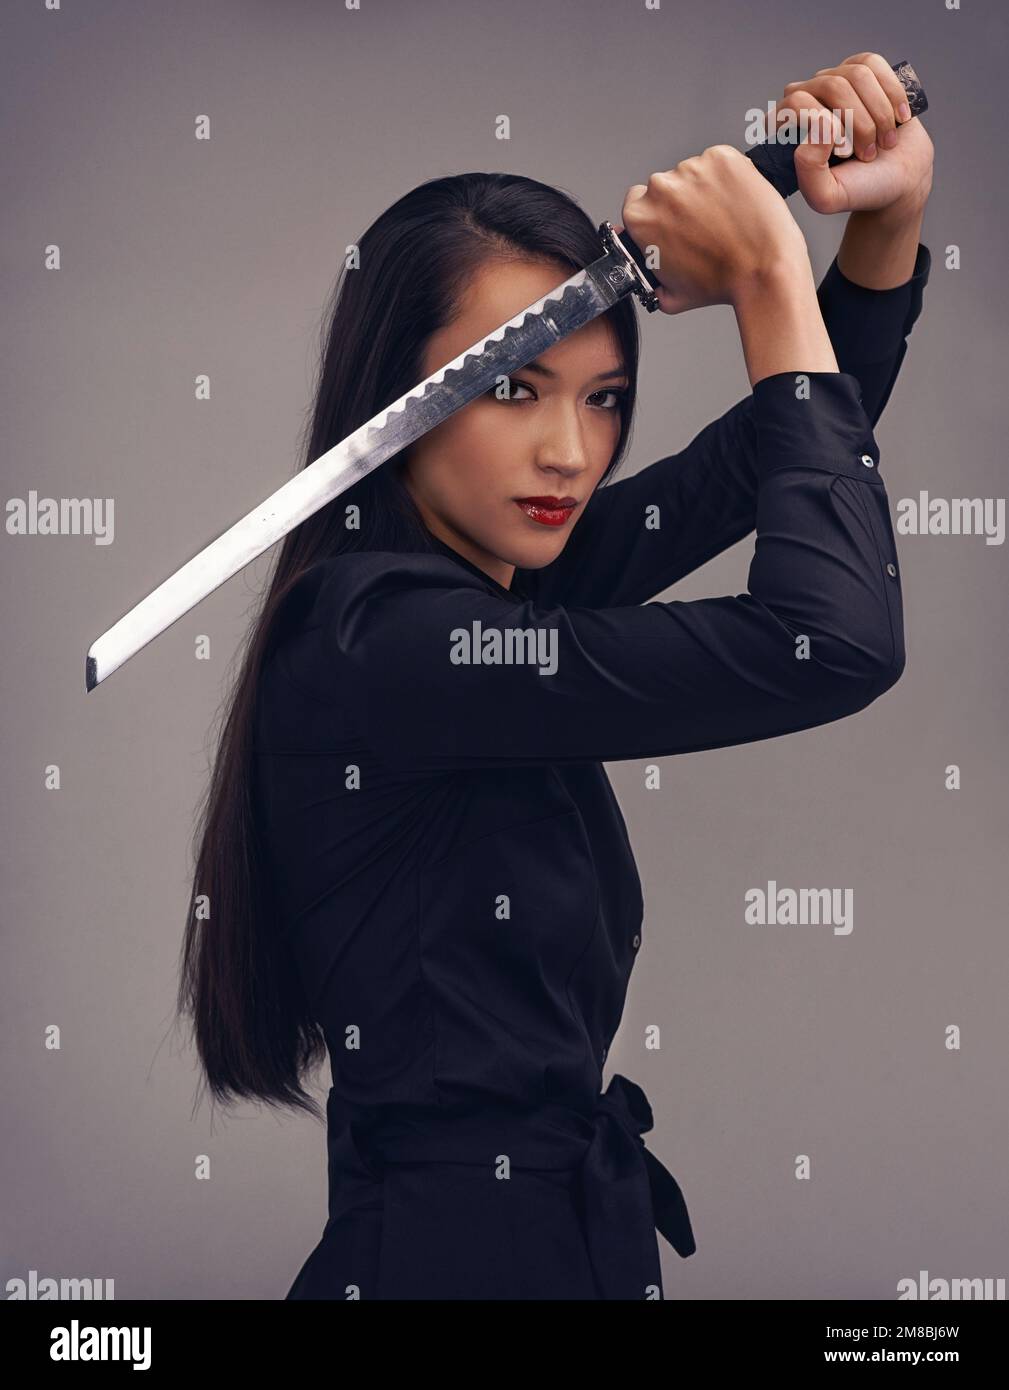 Portrait, sword and samurai with a model woman in studio on a gray background for martial arts or combat. Training, fantasy and weapon with an asian Stock Photo